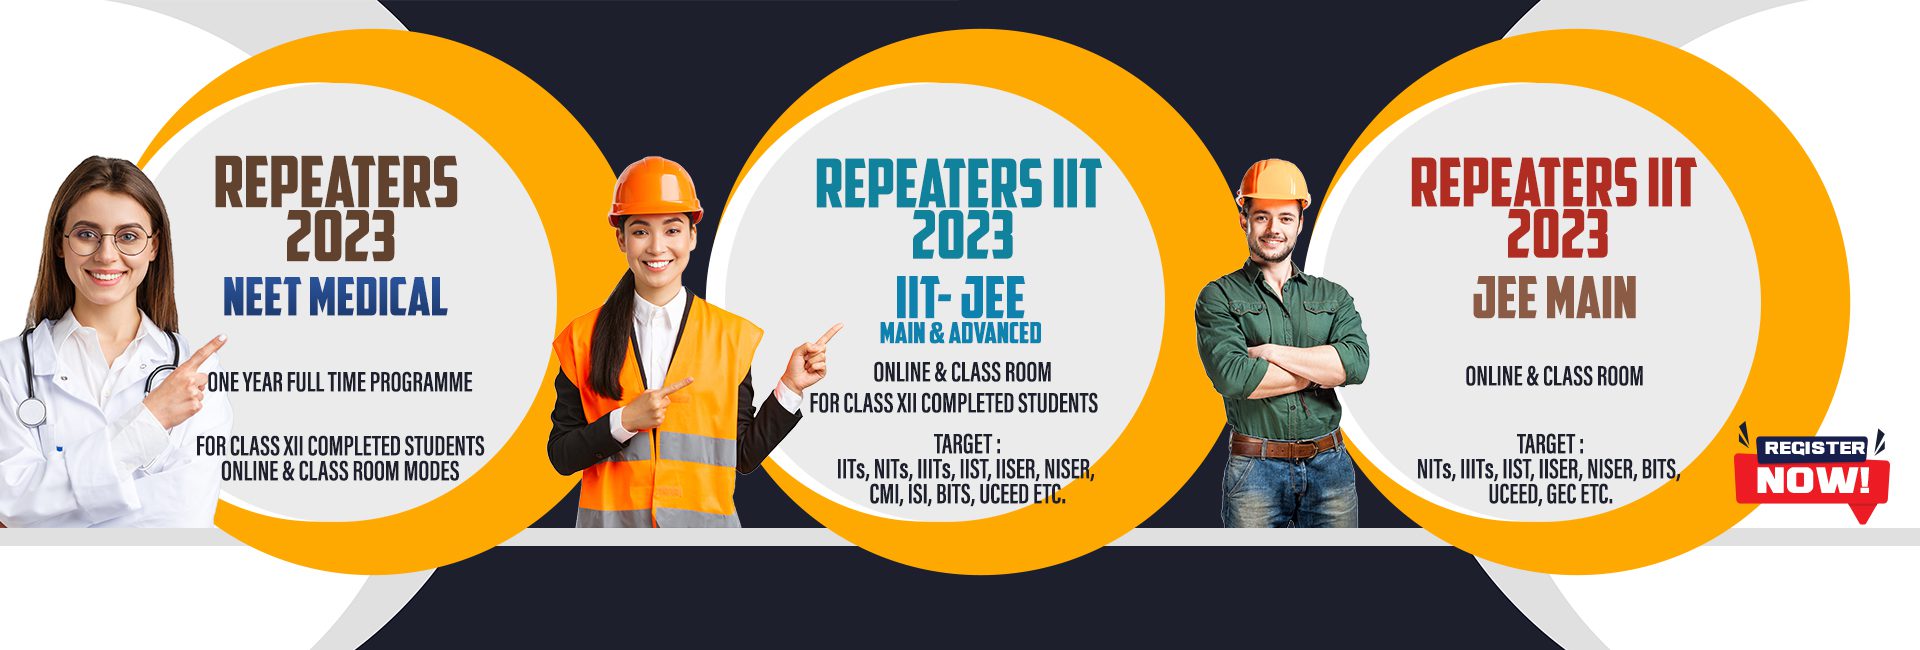 REPEATERS--2023-copy